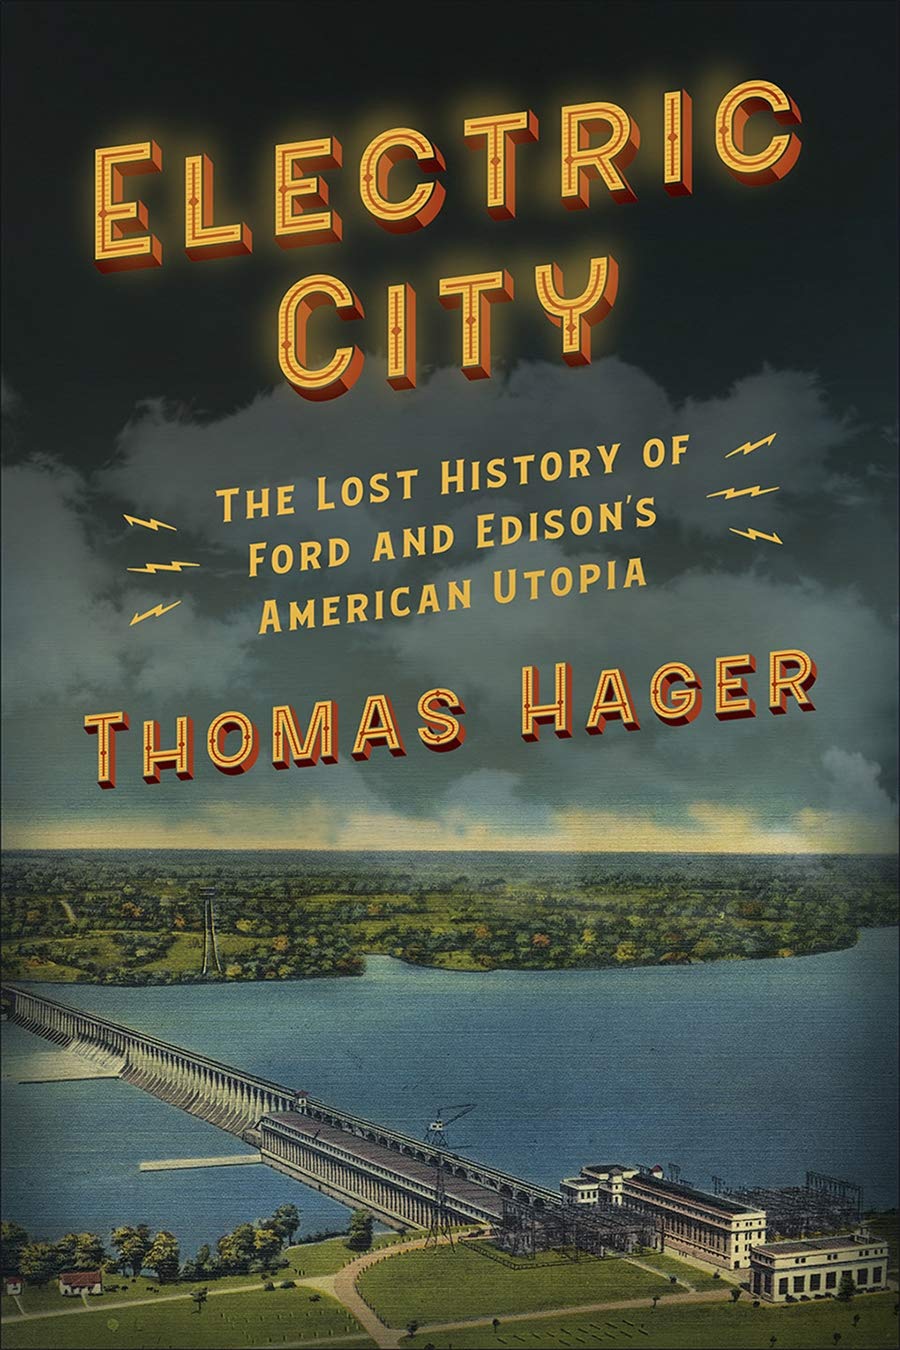 Electric City- The Lost History of Ford and Edison’s American Utopia